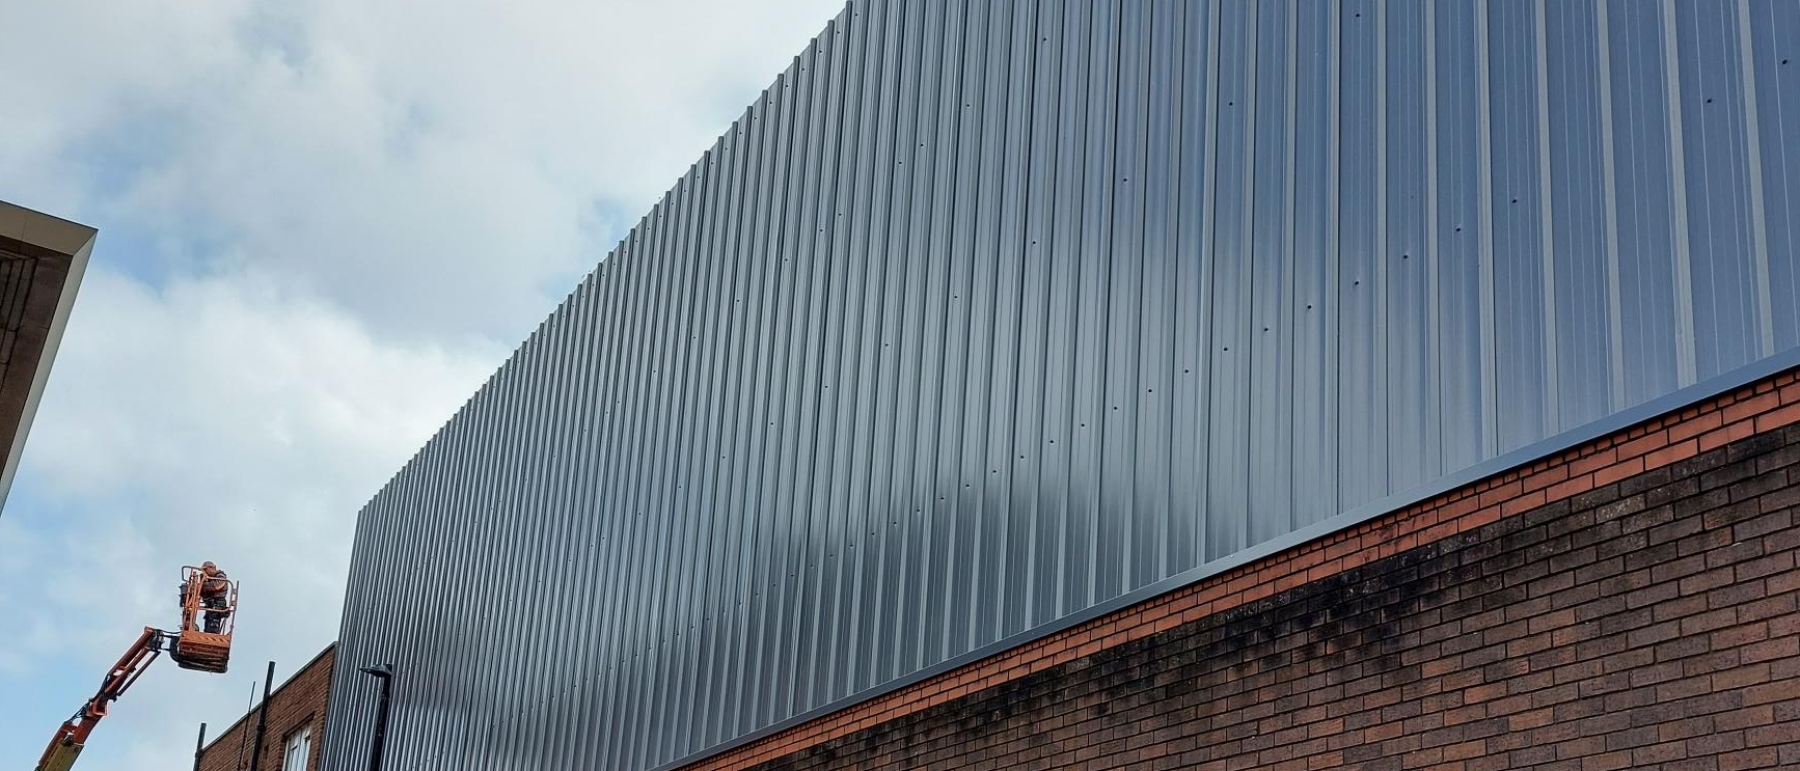 Steel cladding added to an existing building